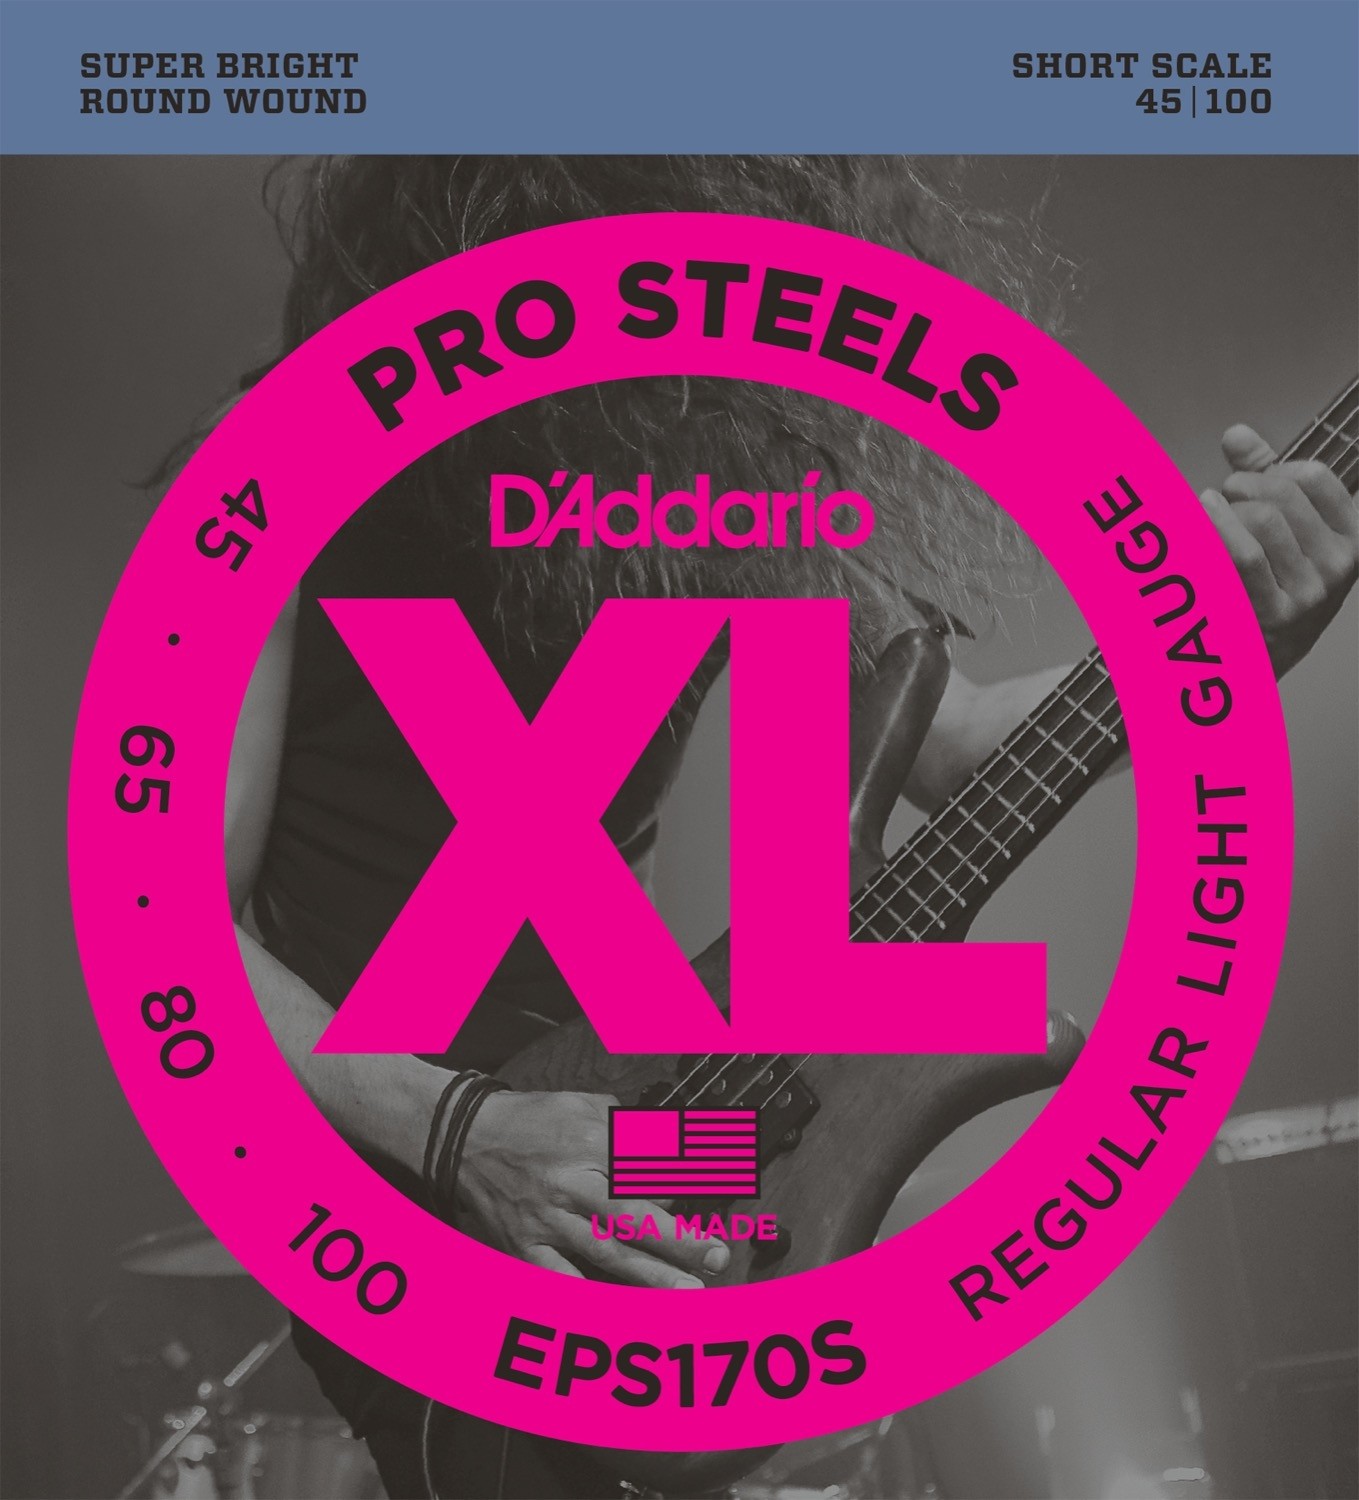 D'Addario Fretted EPS170S Light 045 - 100 - Short Scale